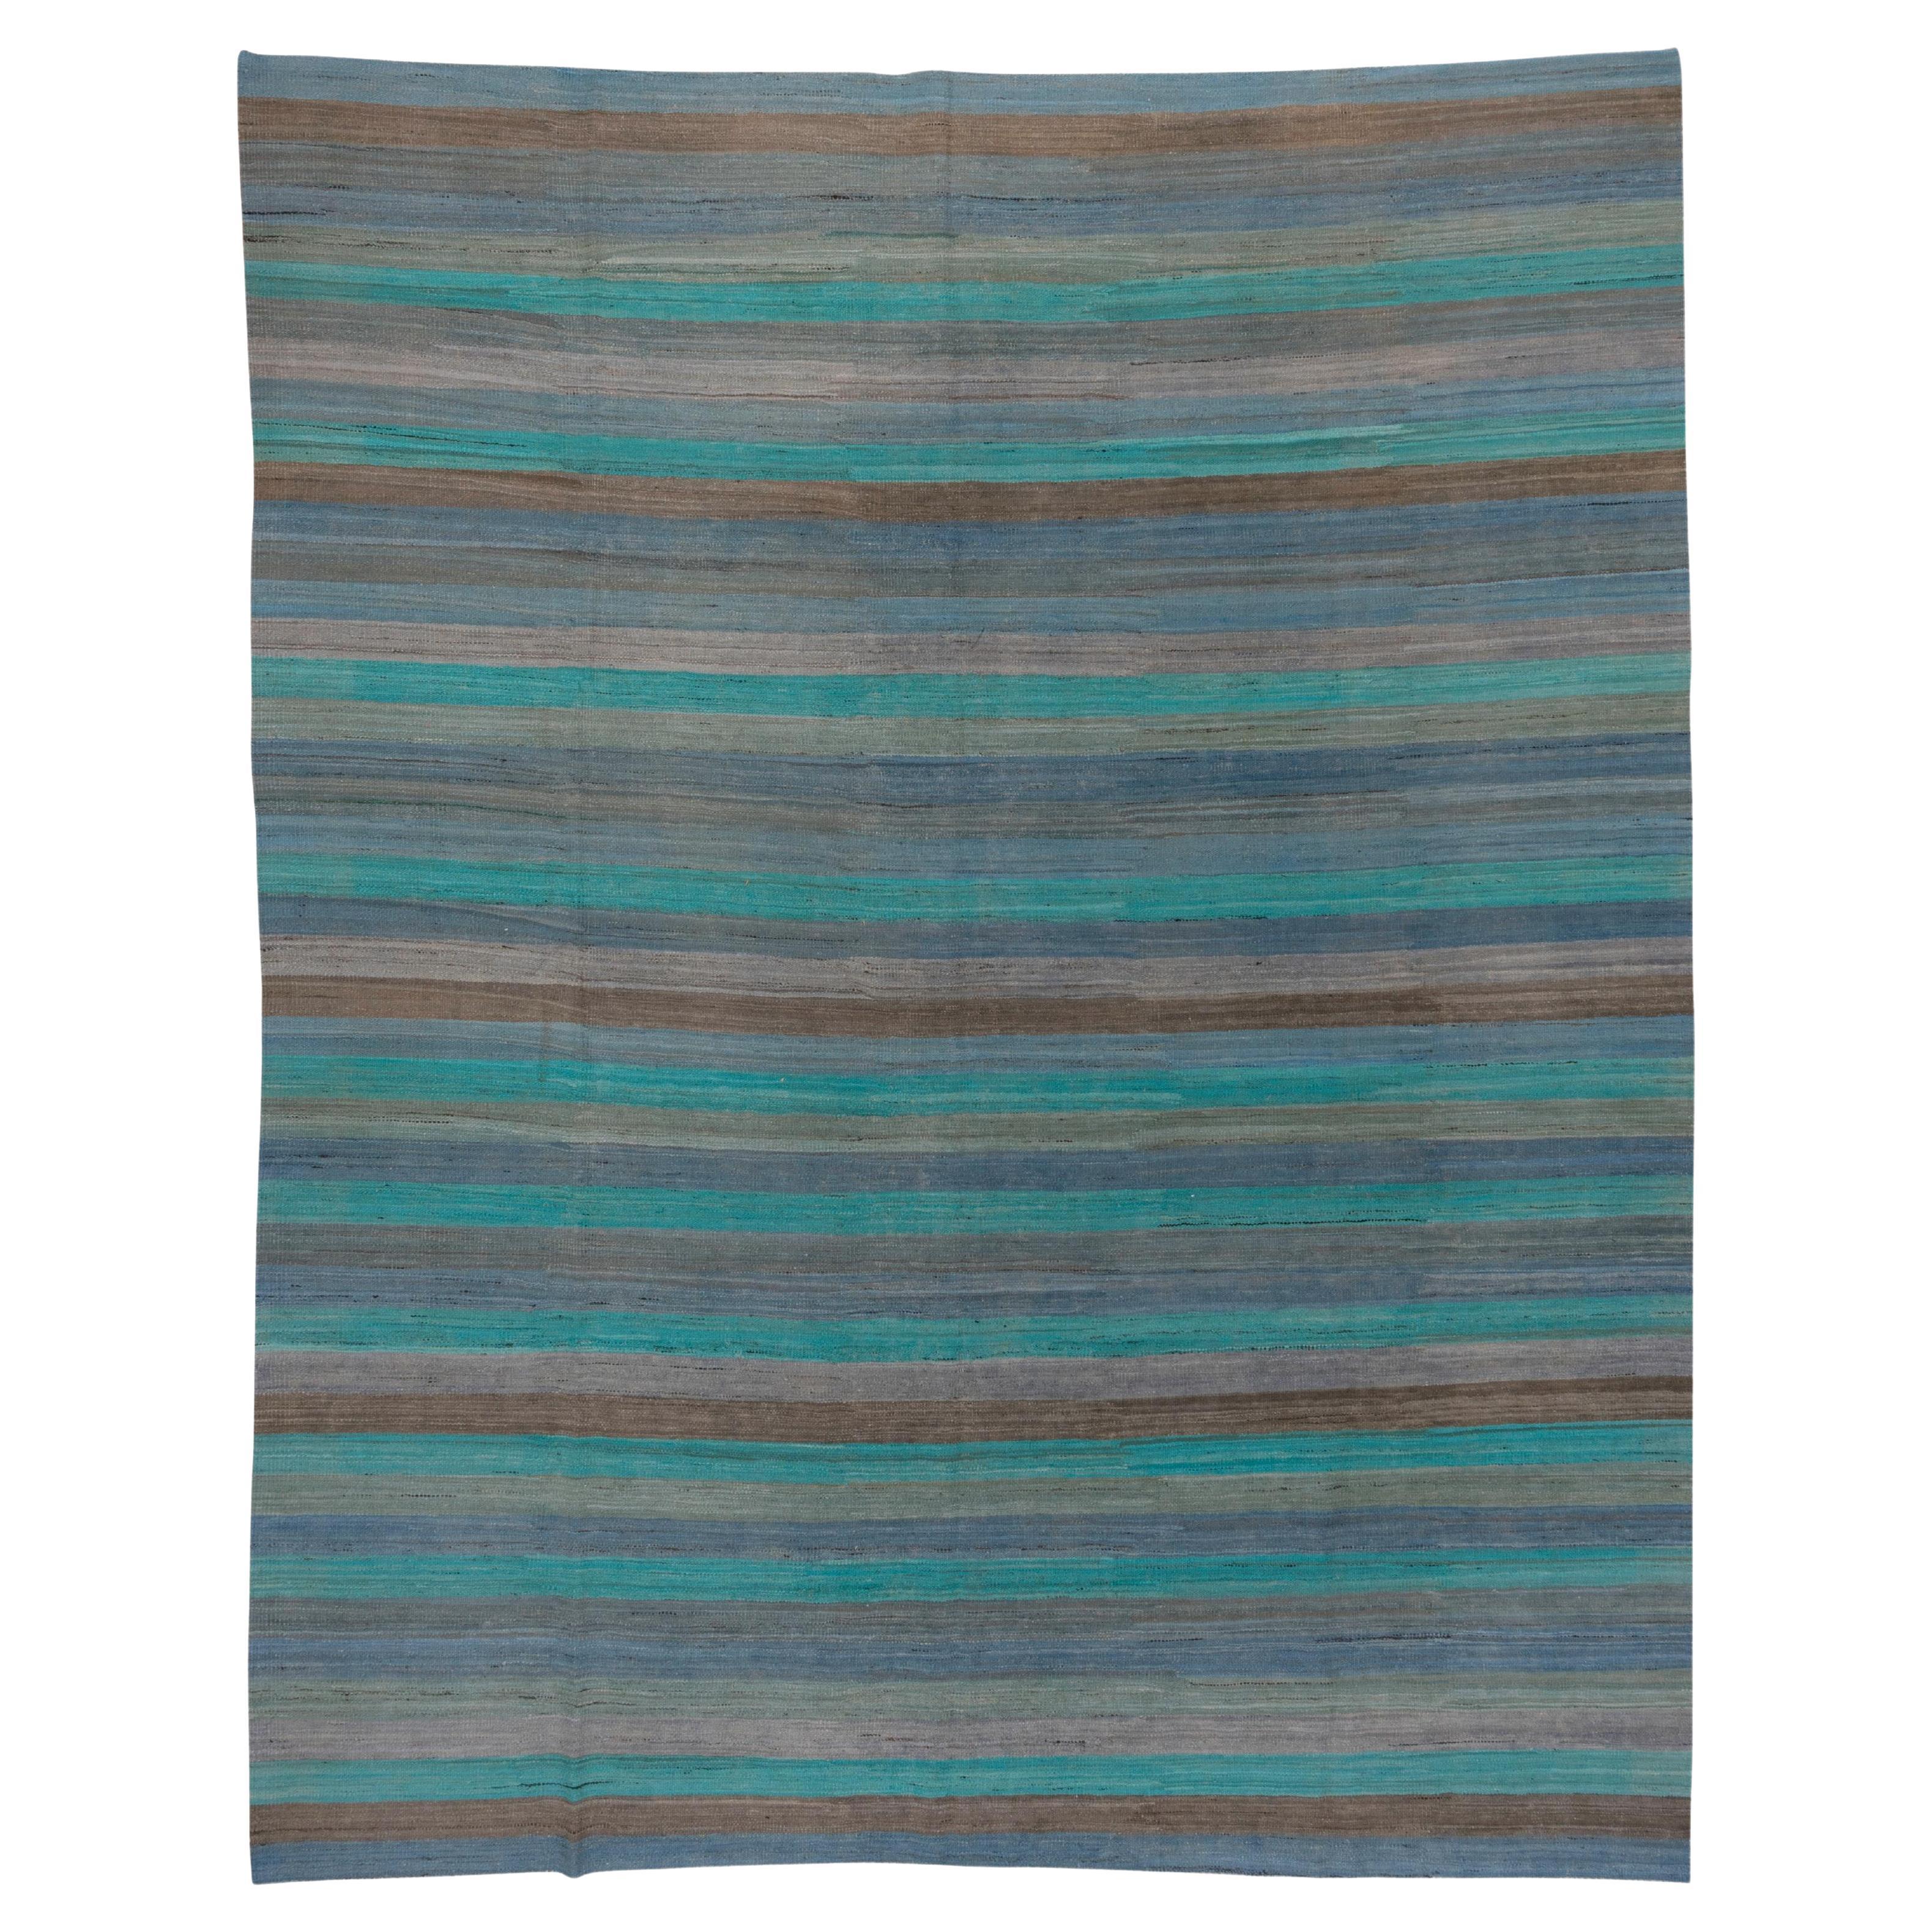 Contemporary Striped Flatweave Area Rug, Blue, Light Sea Green & Brown Tones For Sale